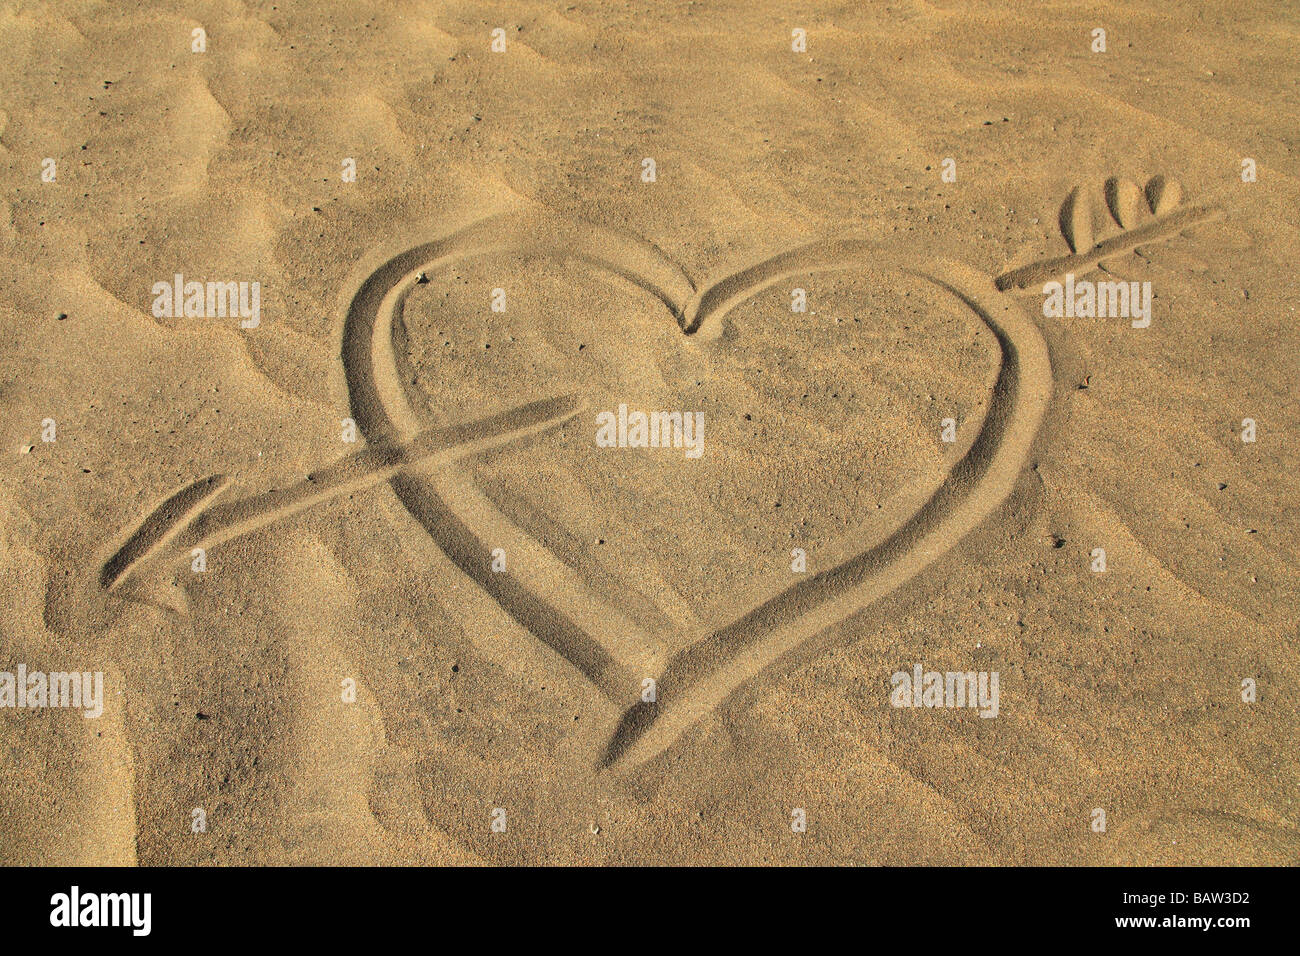 Heart drawn in the sand at the beach Canarian Islands Spain Europe Stock Photo